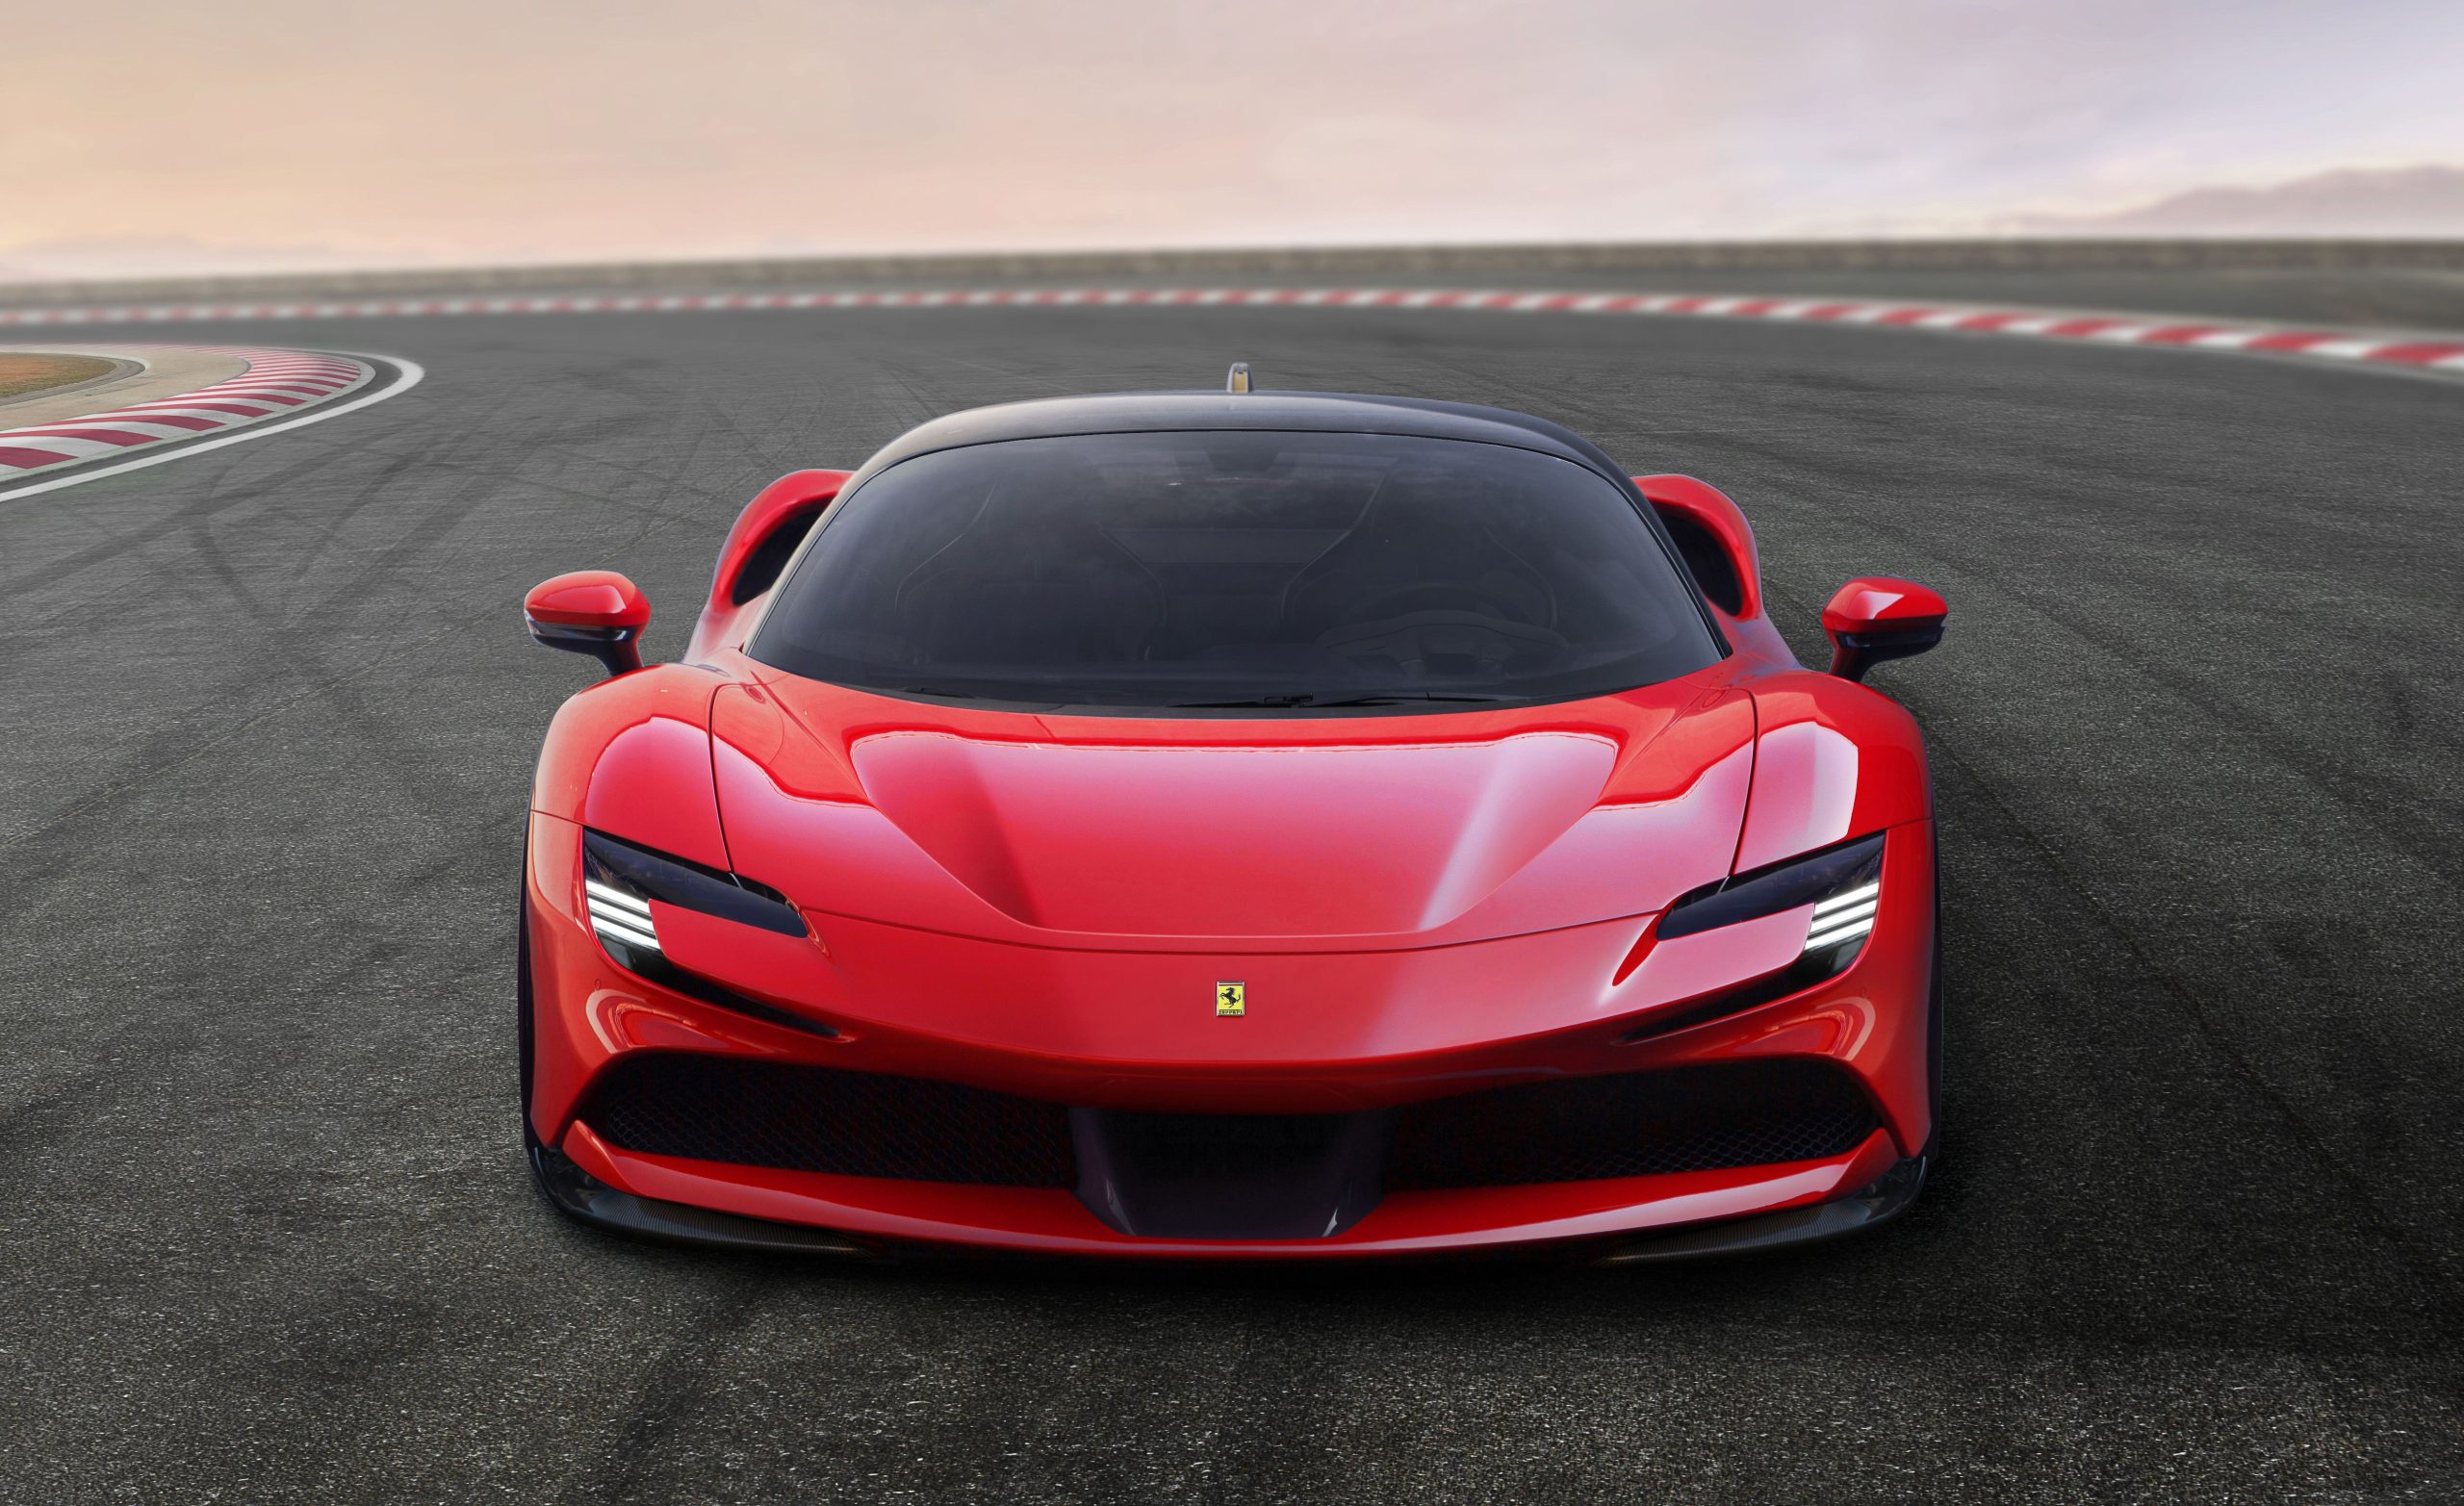 Full frontal image of a red Ferrari SF90 Stradale on a race circuit.